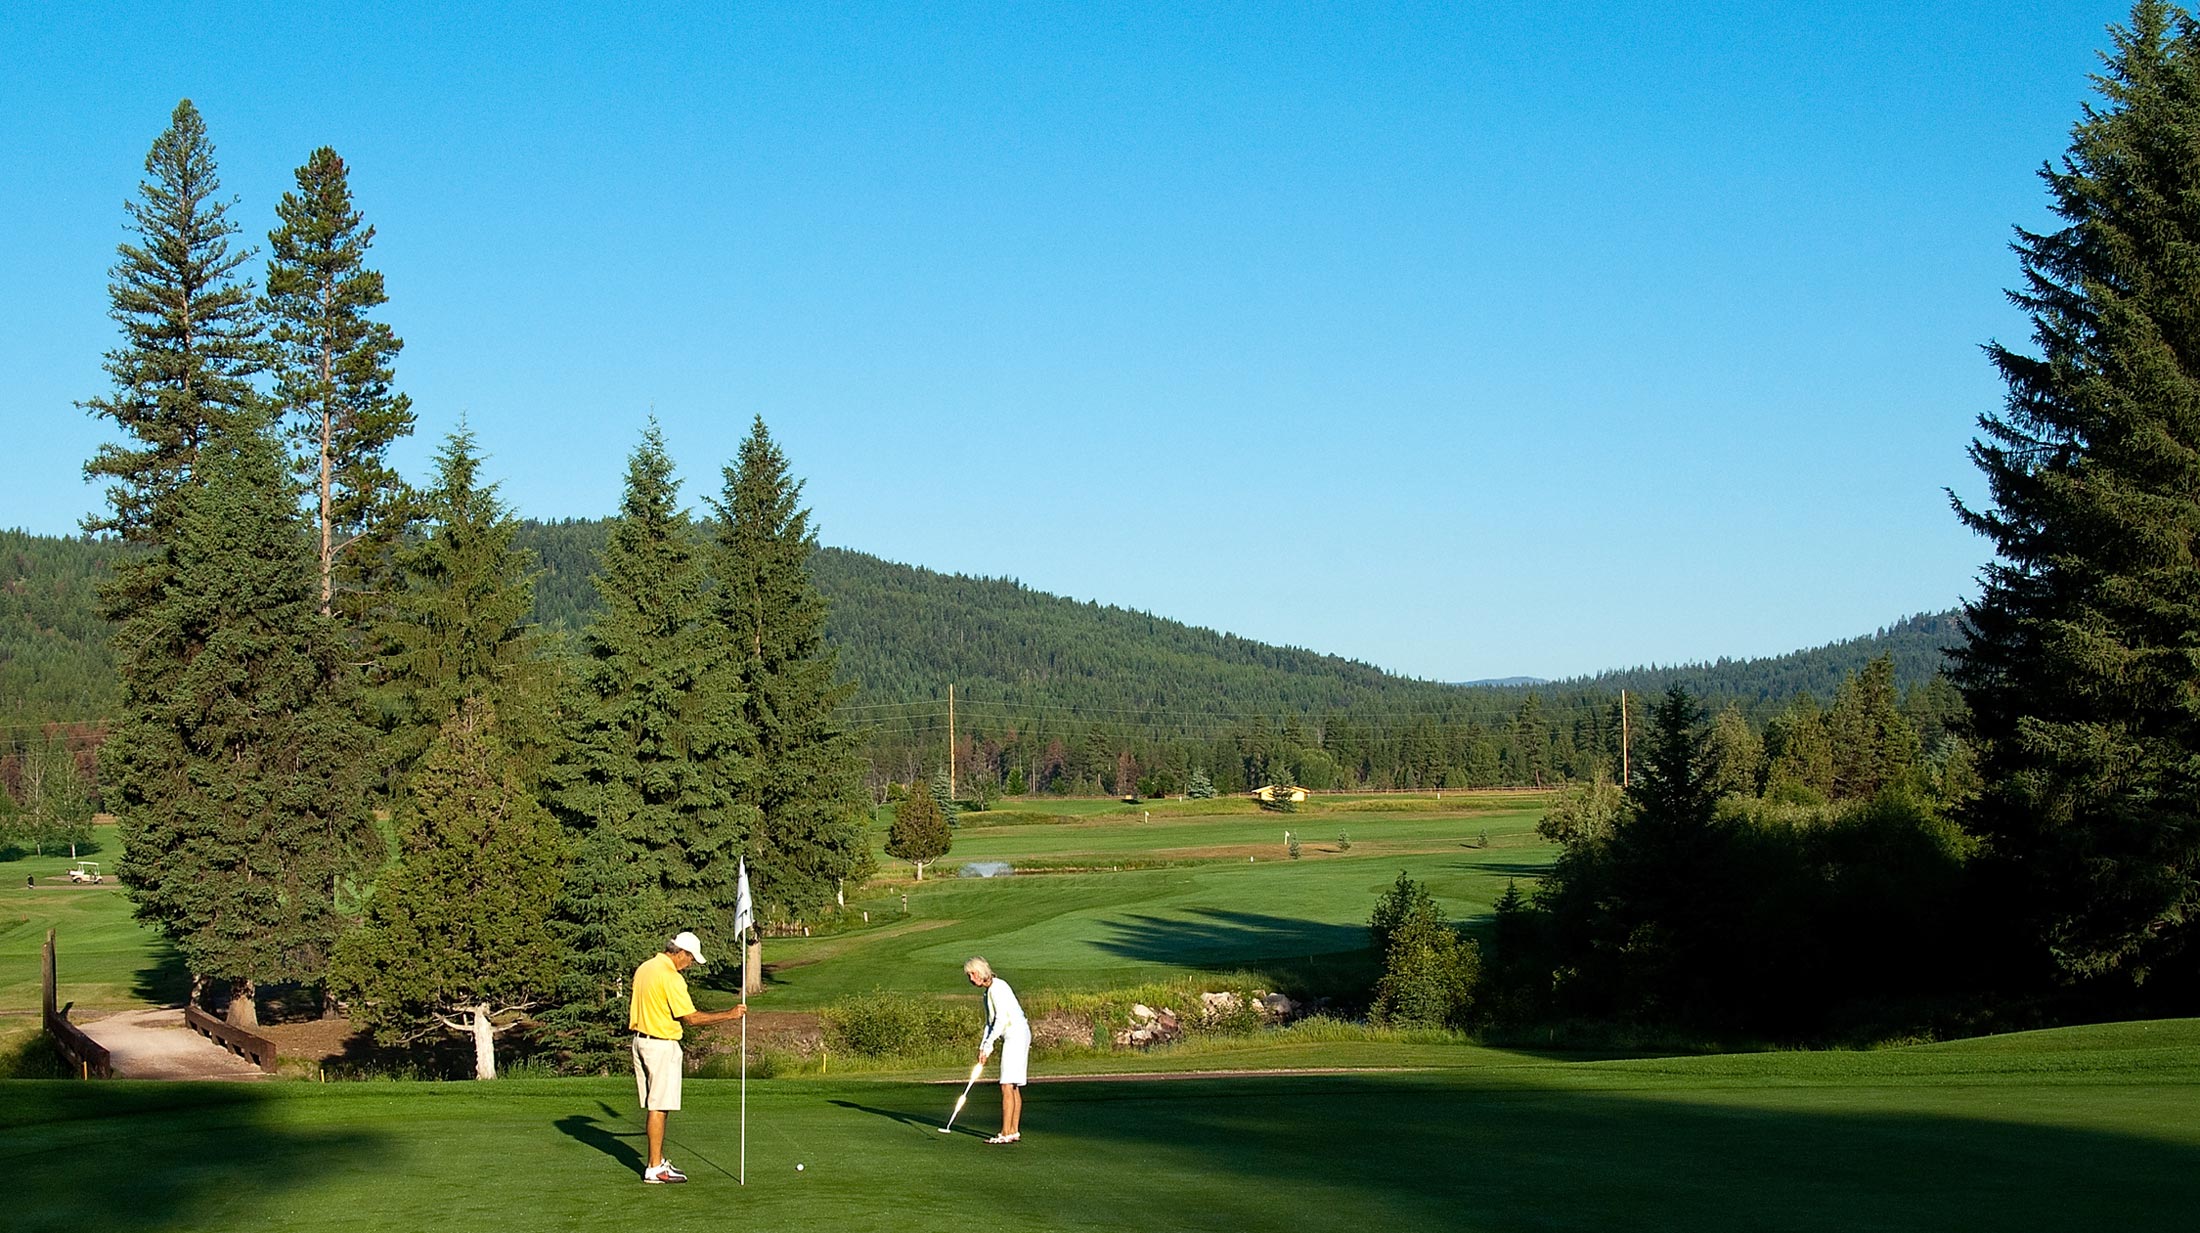 Take in the fall scenic views in Western Montana by playing a round of golf while admiring the Tamarack trees and snowcapped peaks.